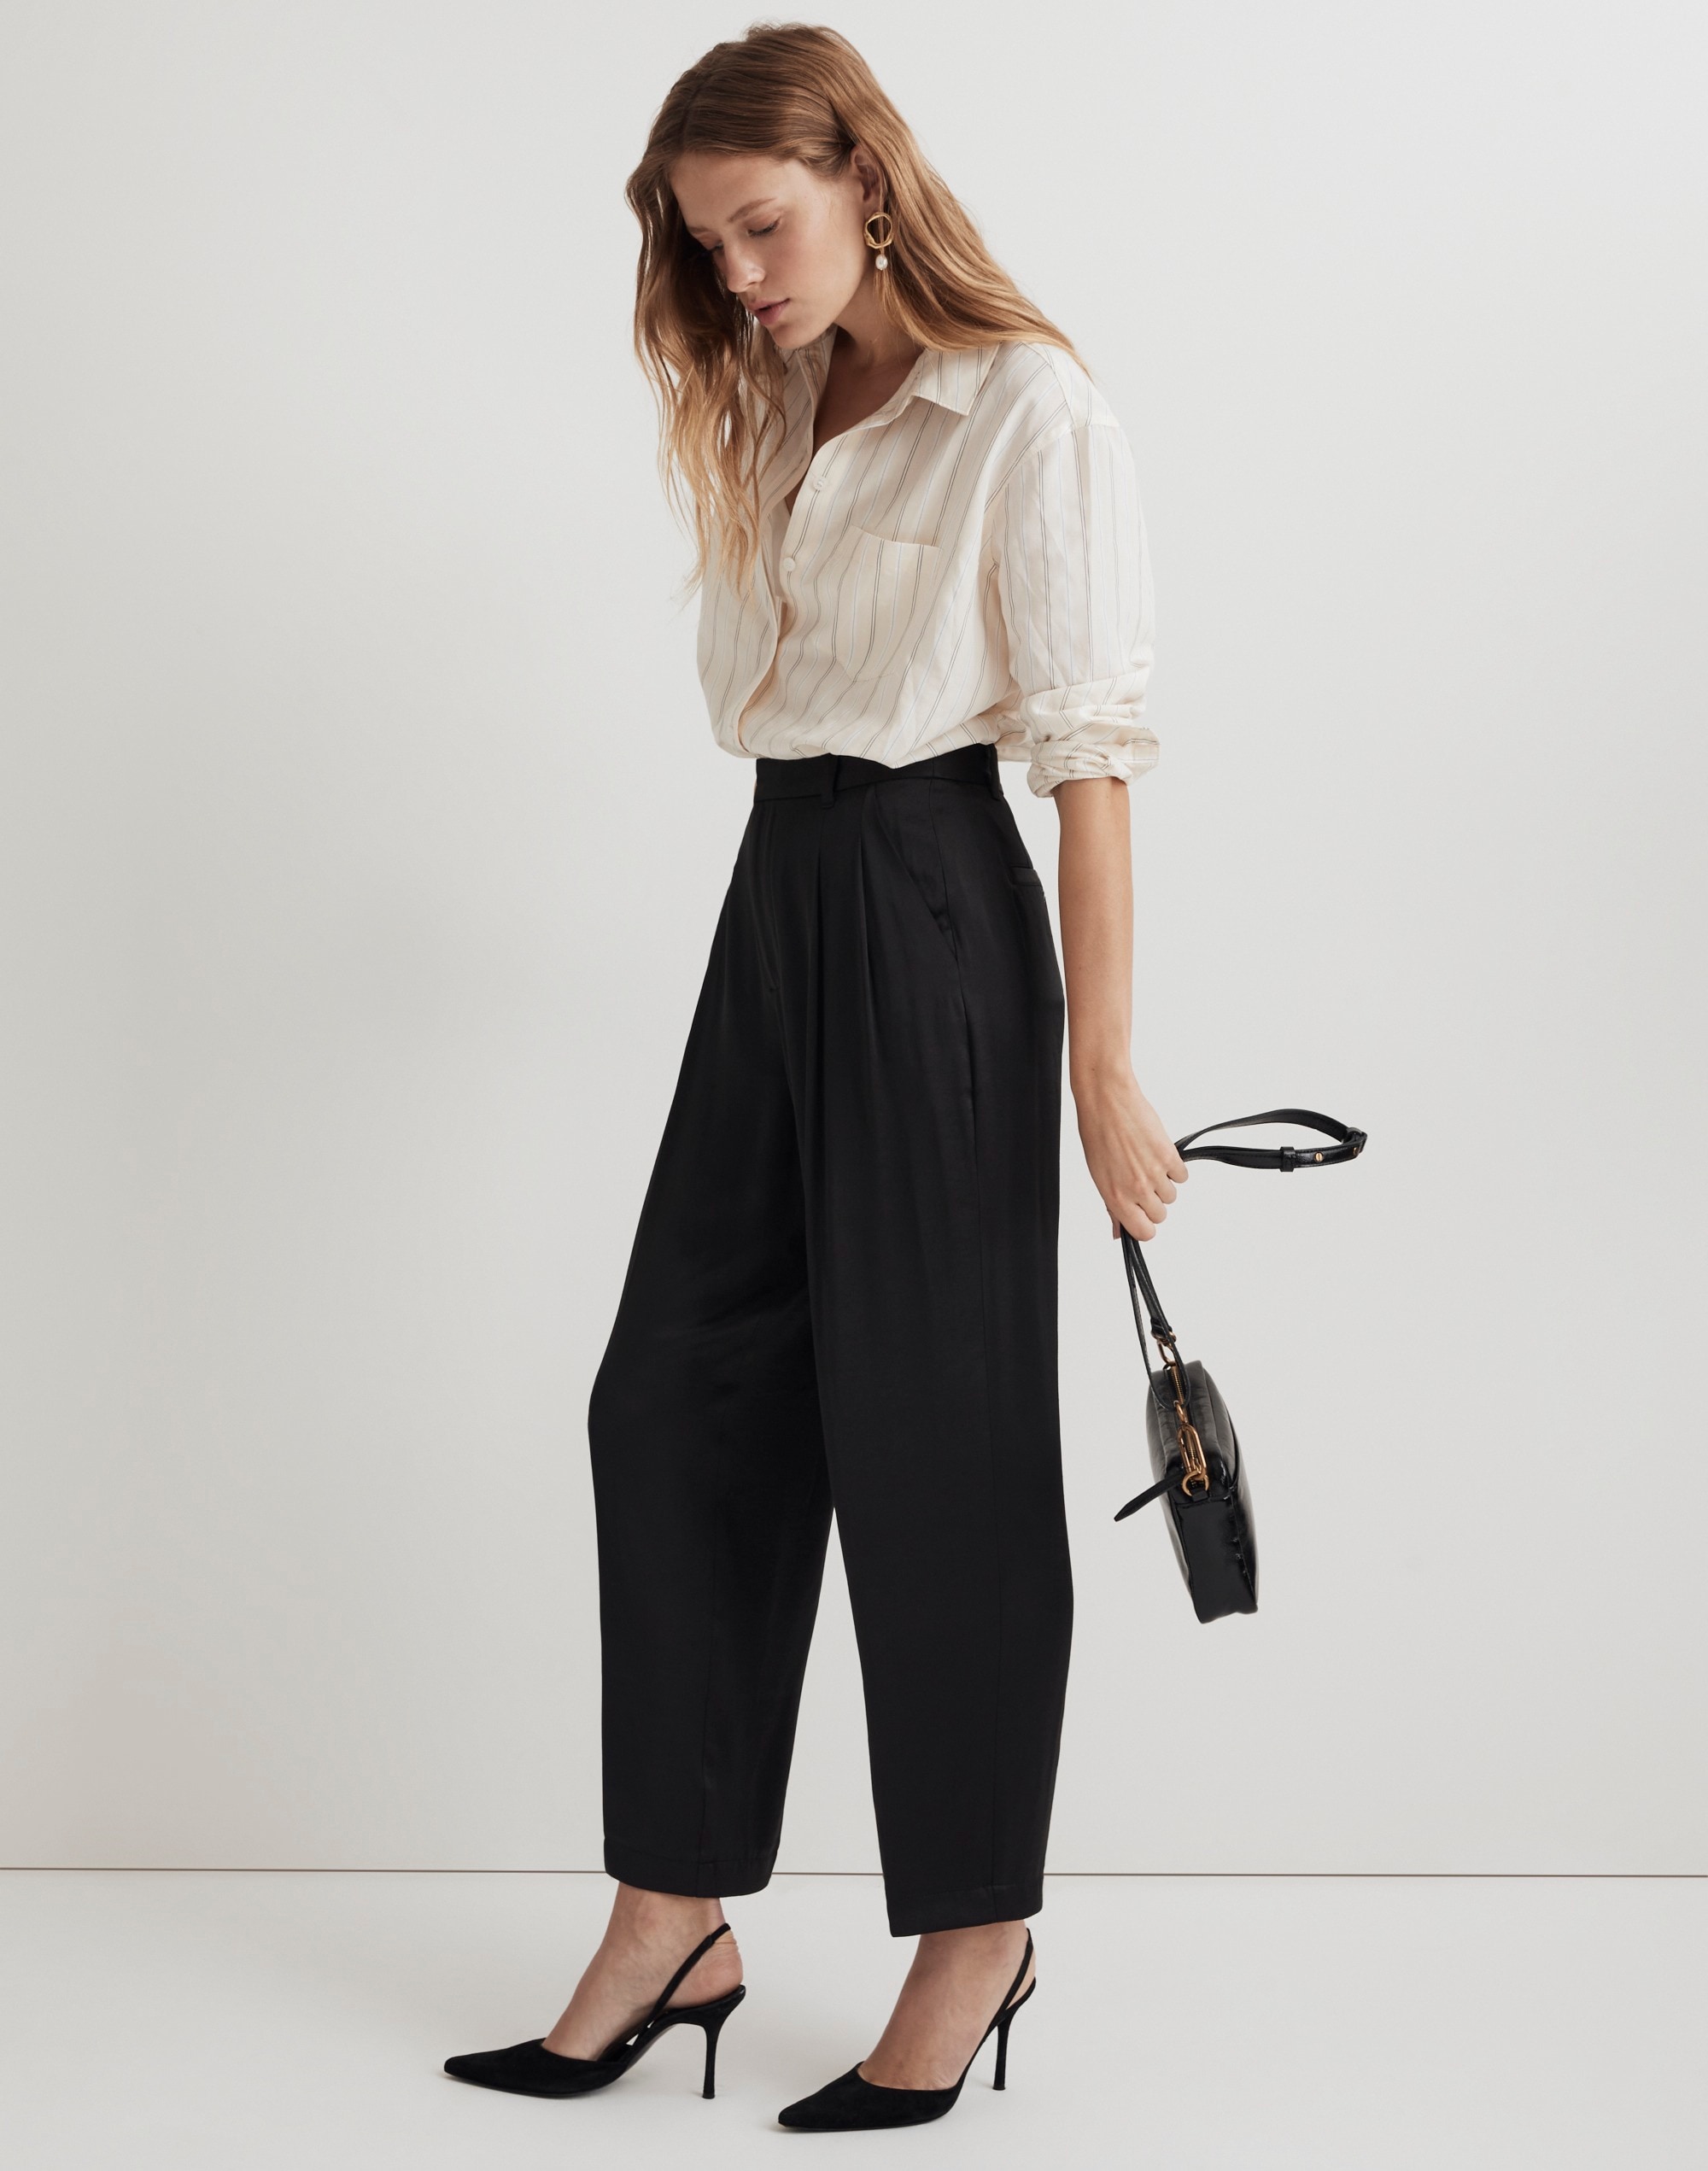 The Petite Turner Tapered Pant in Satin